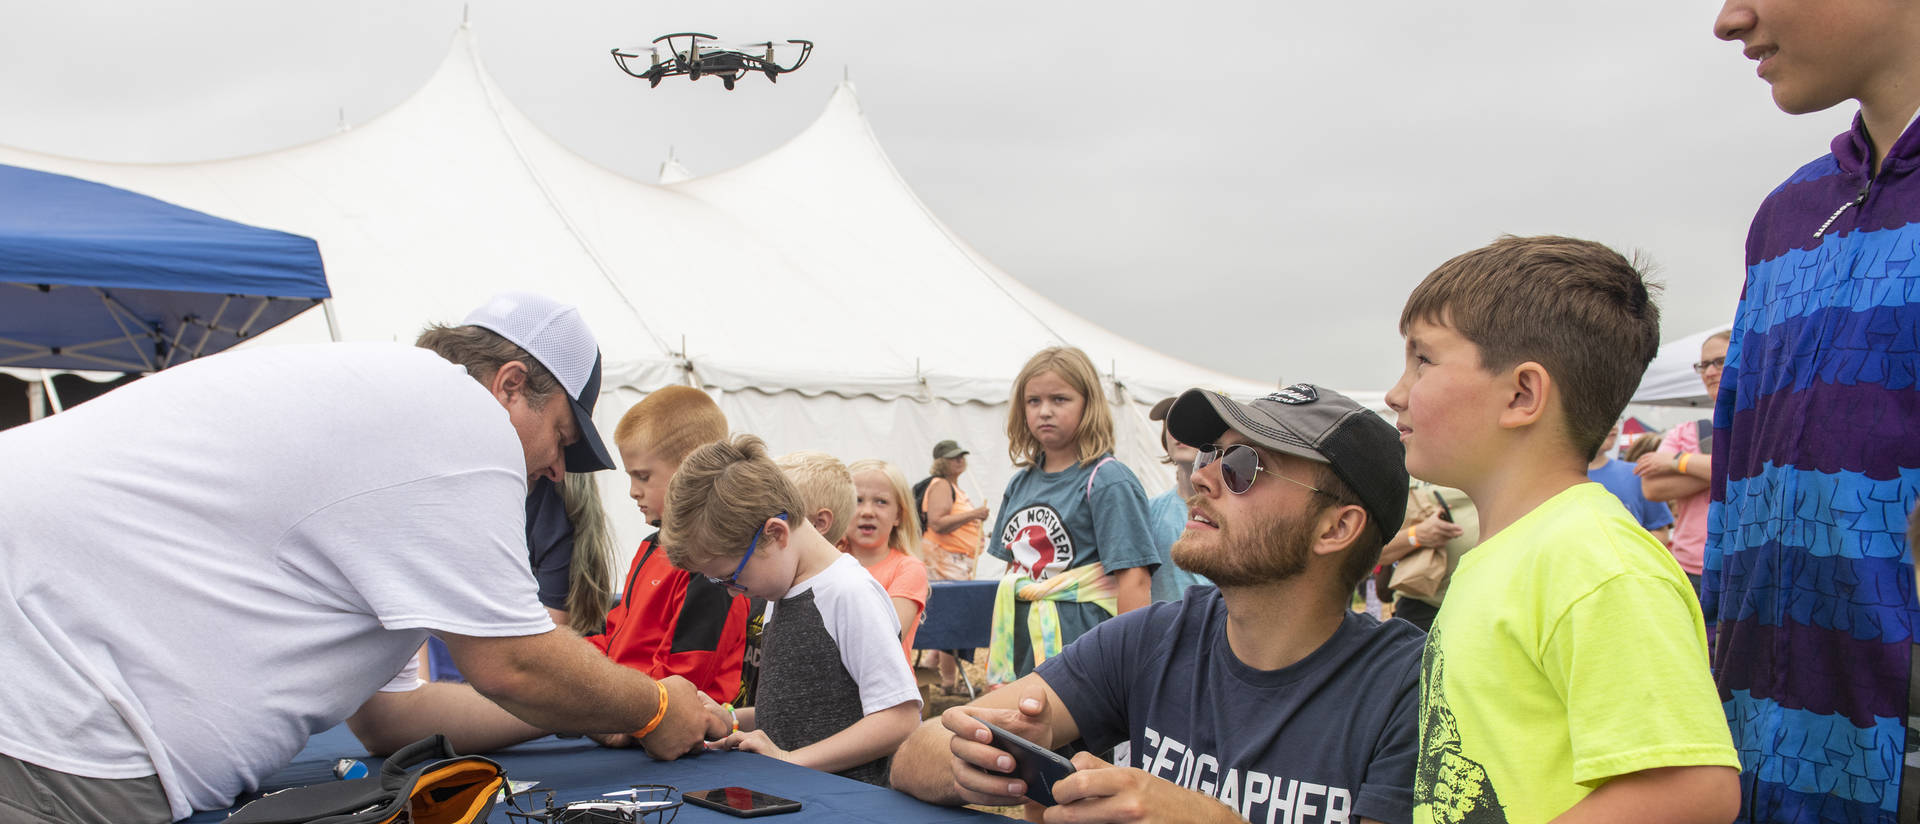 Kids and college student at toy drone table event